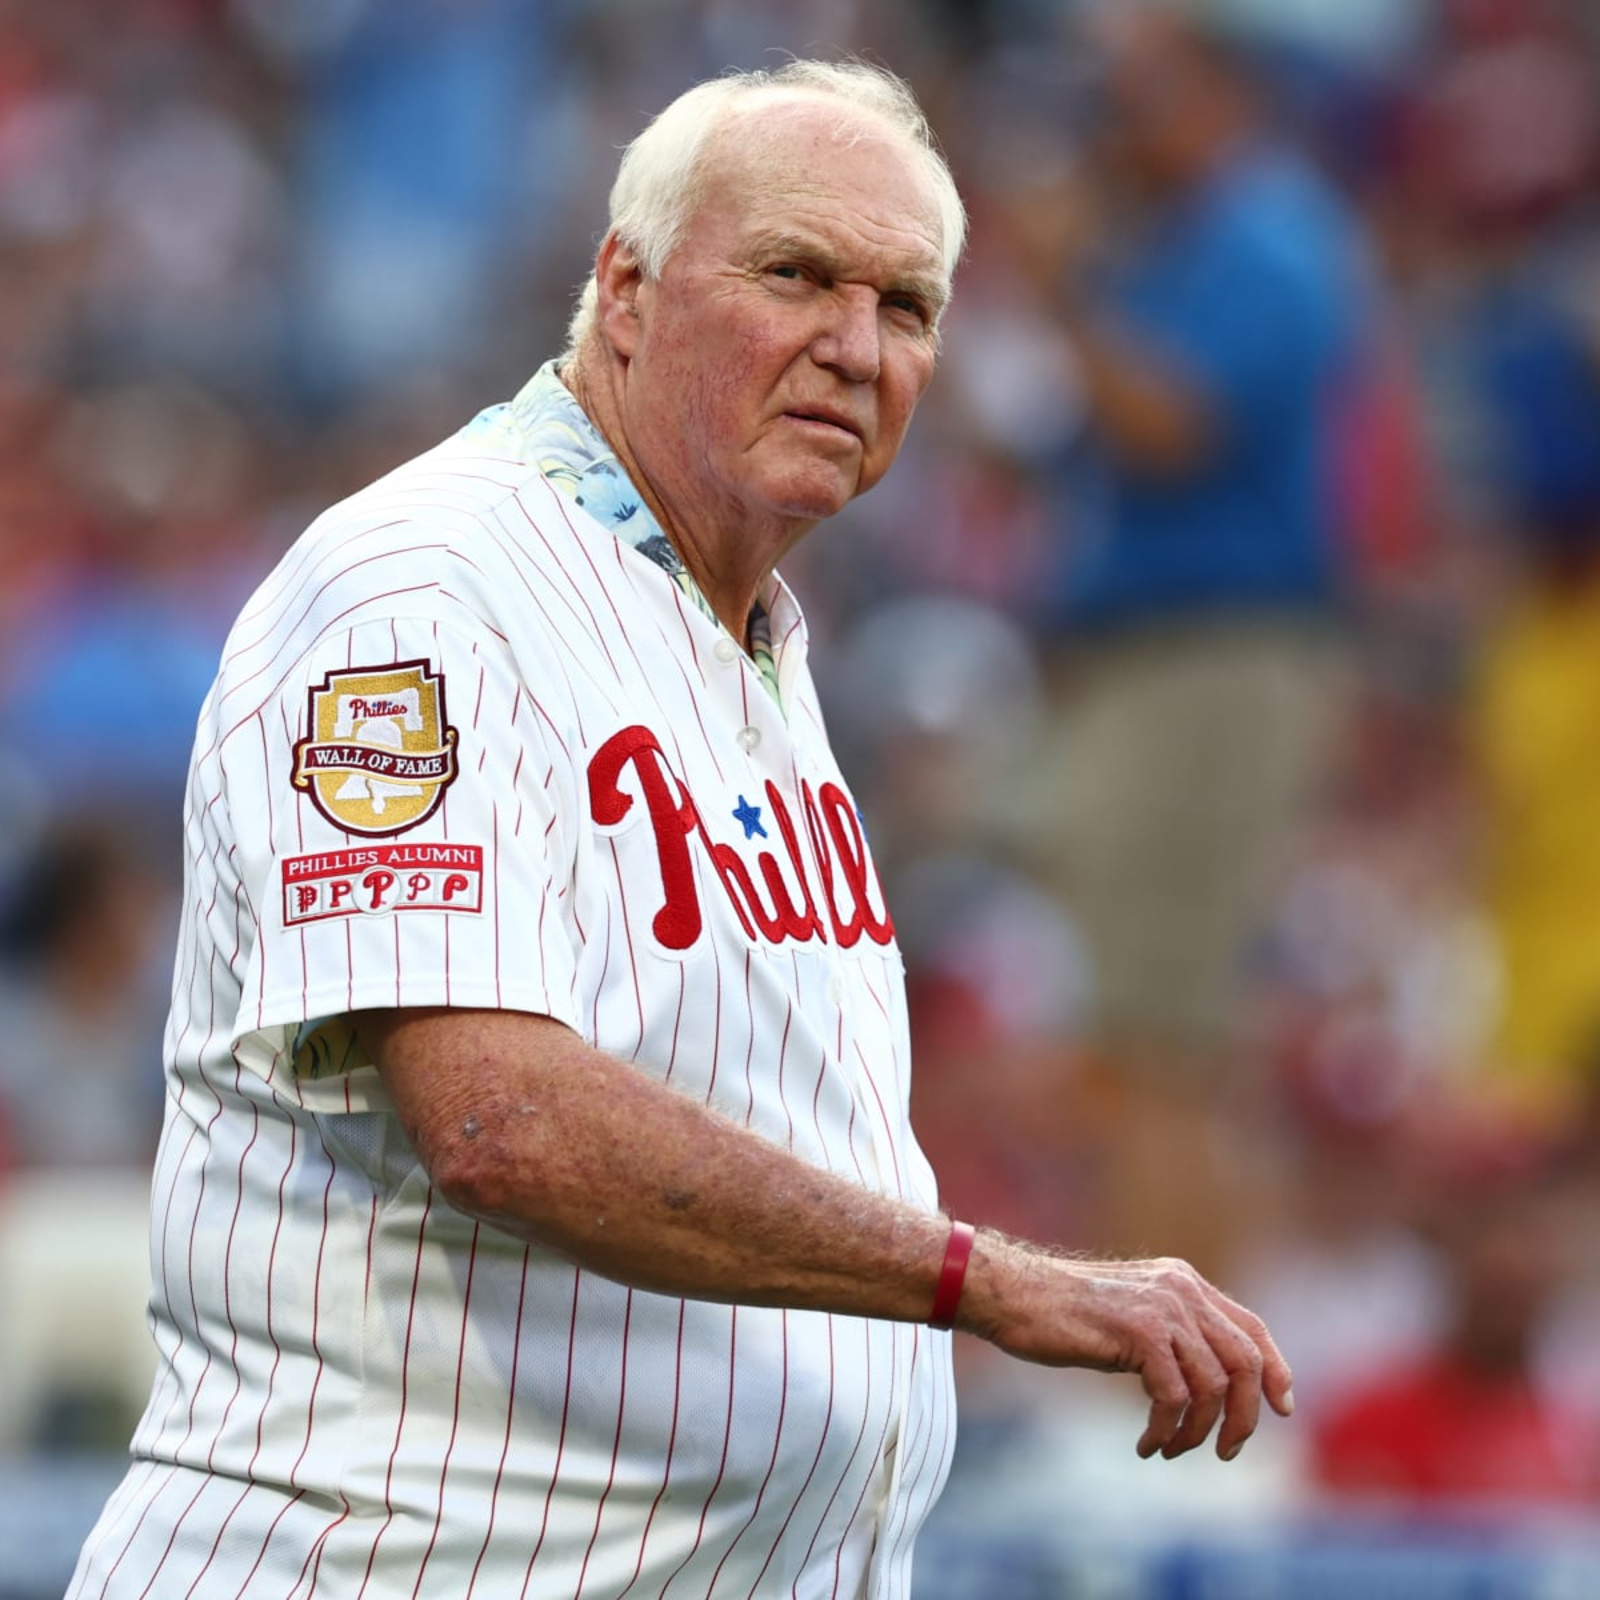 Charlie Manuel on X: A tweet to remind you and your loved ones